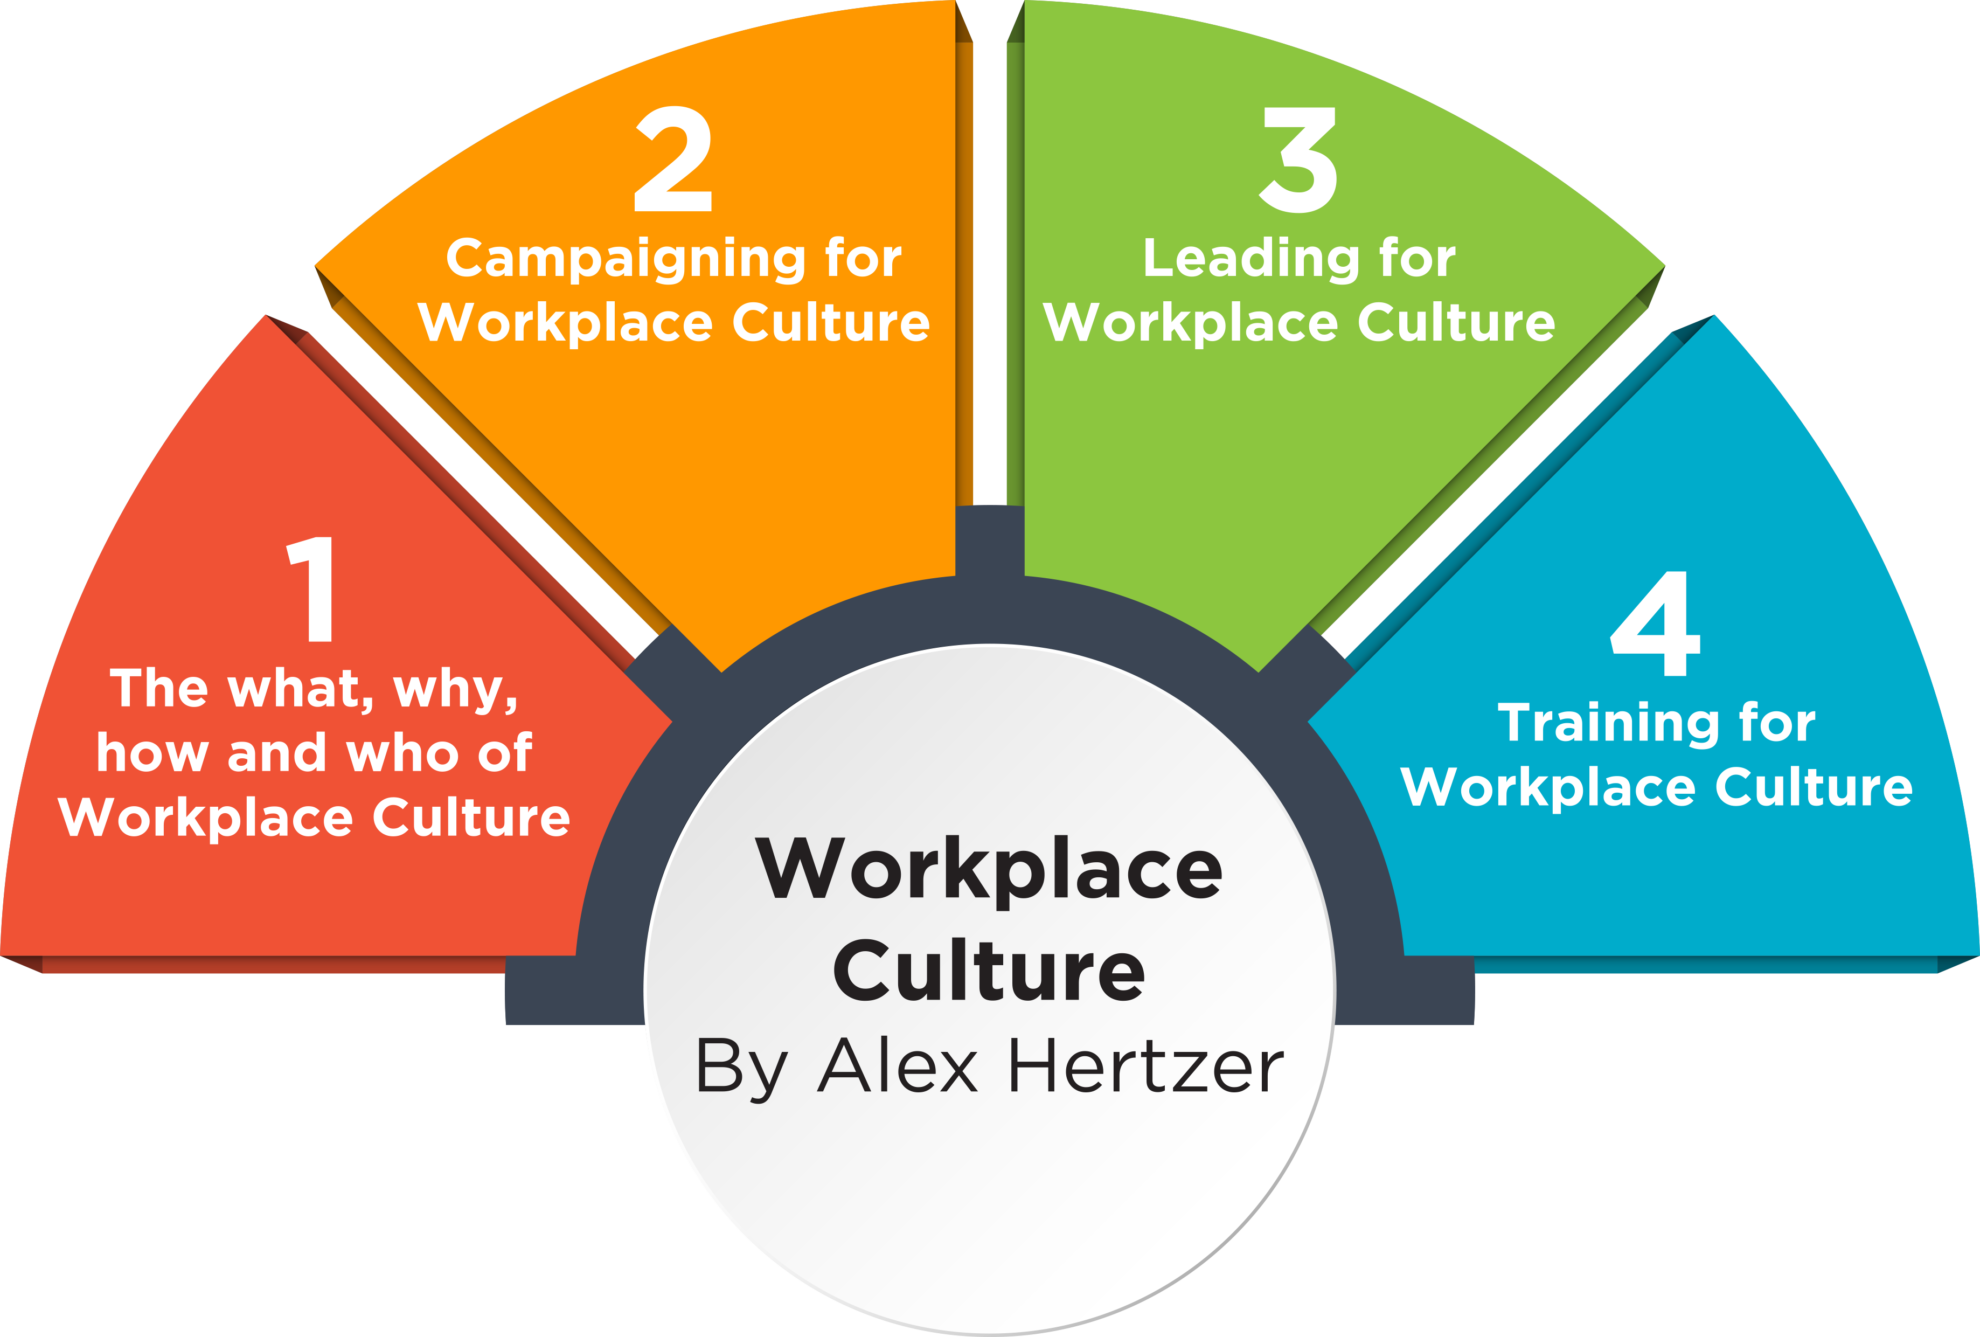 Part 4 Training for Workplace Culture MVMC